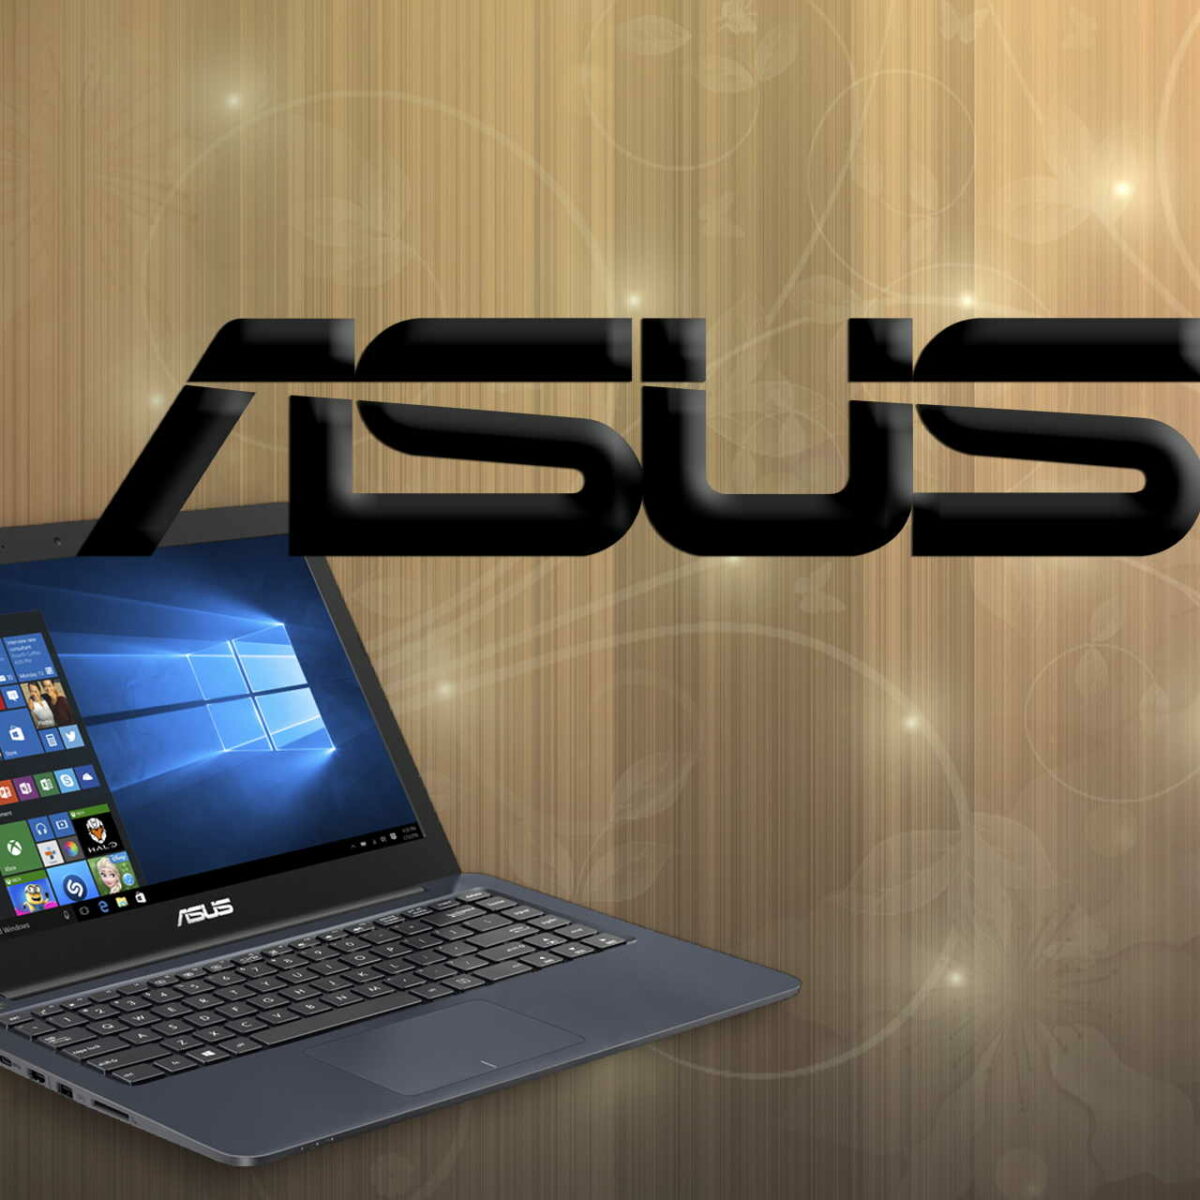 asus touchpad smart gesture download windows 10